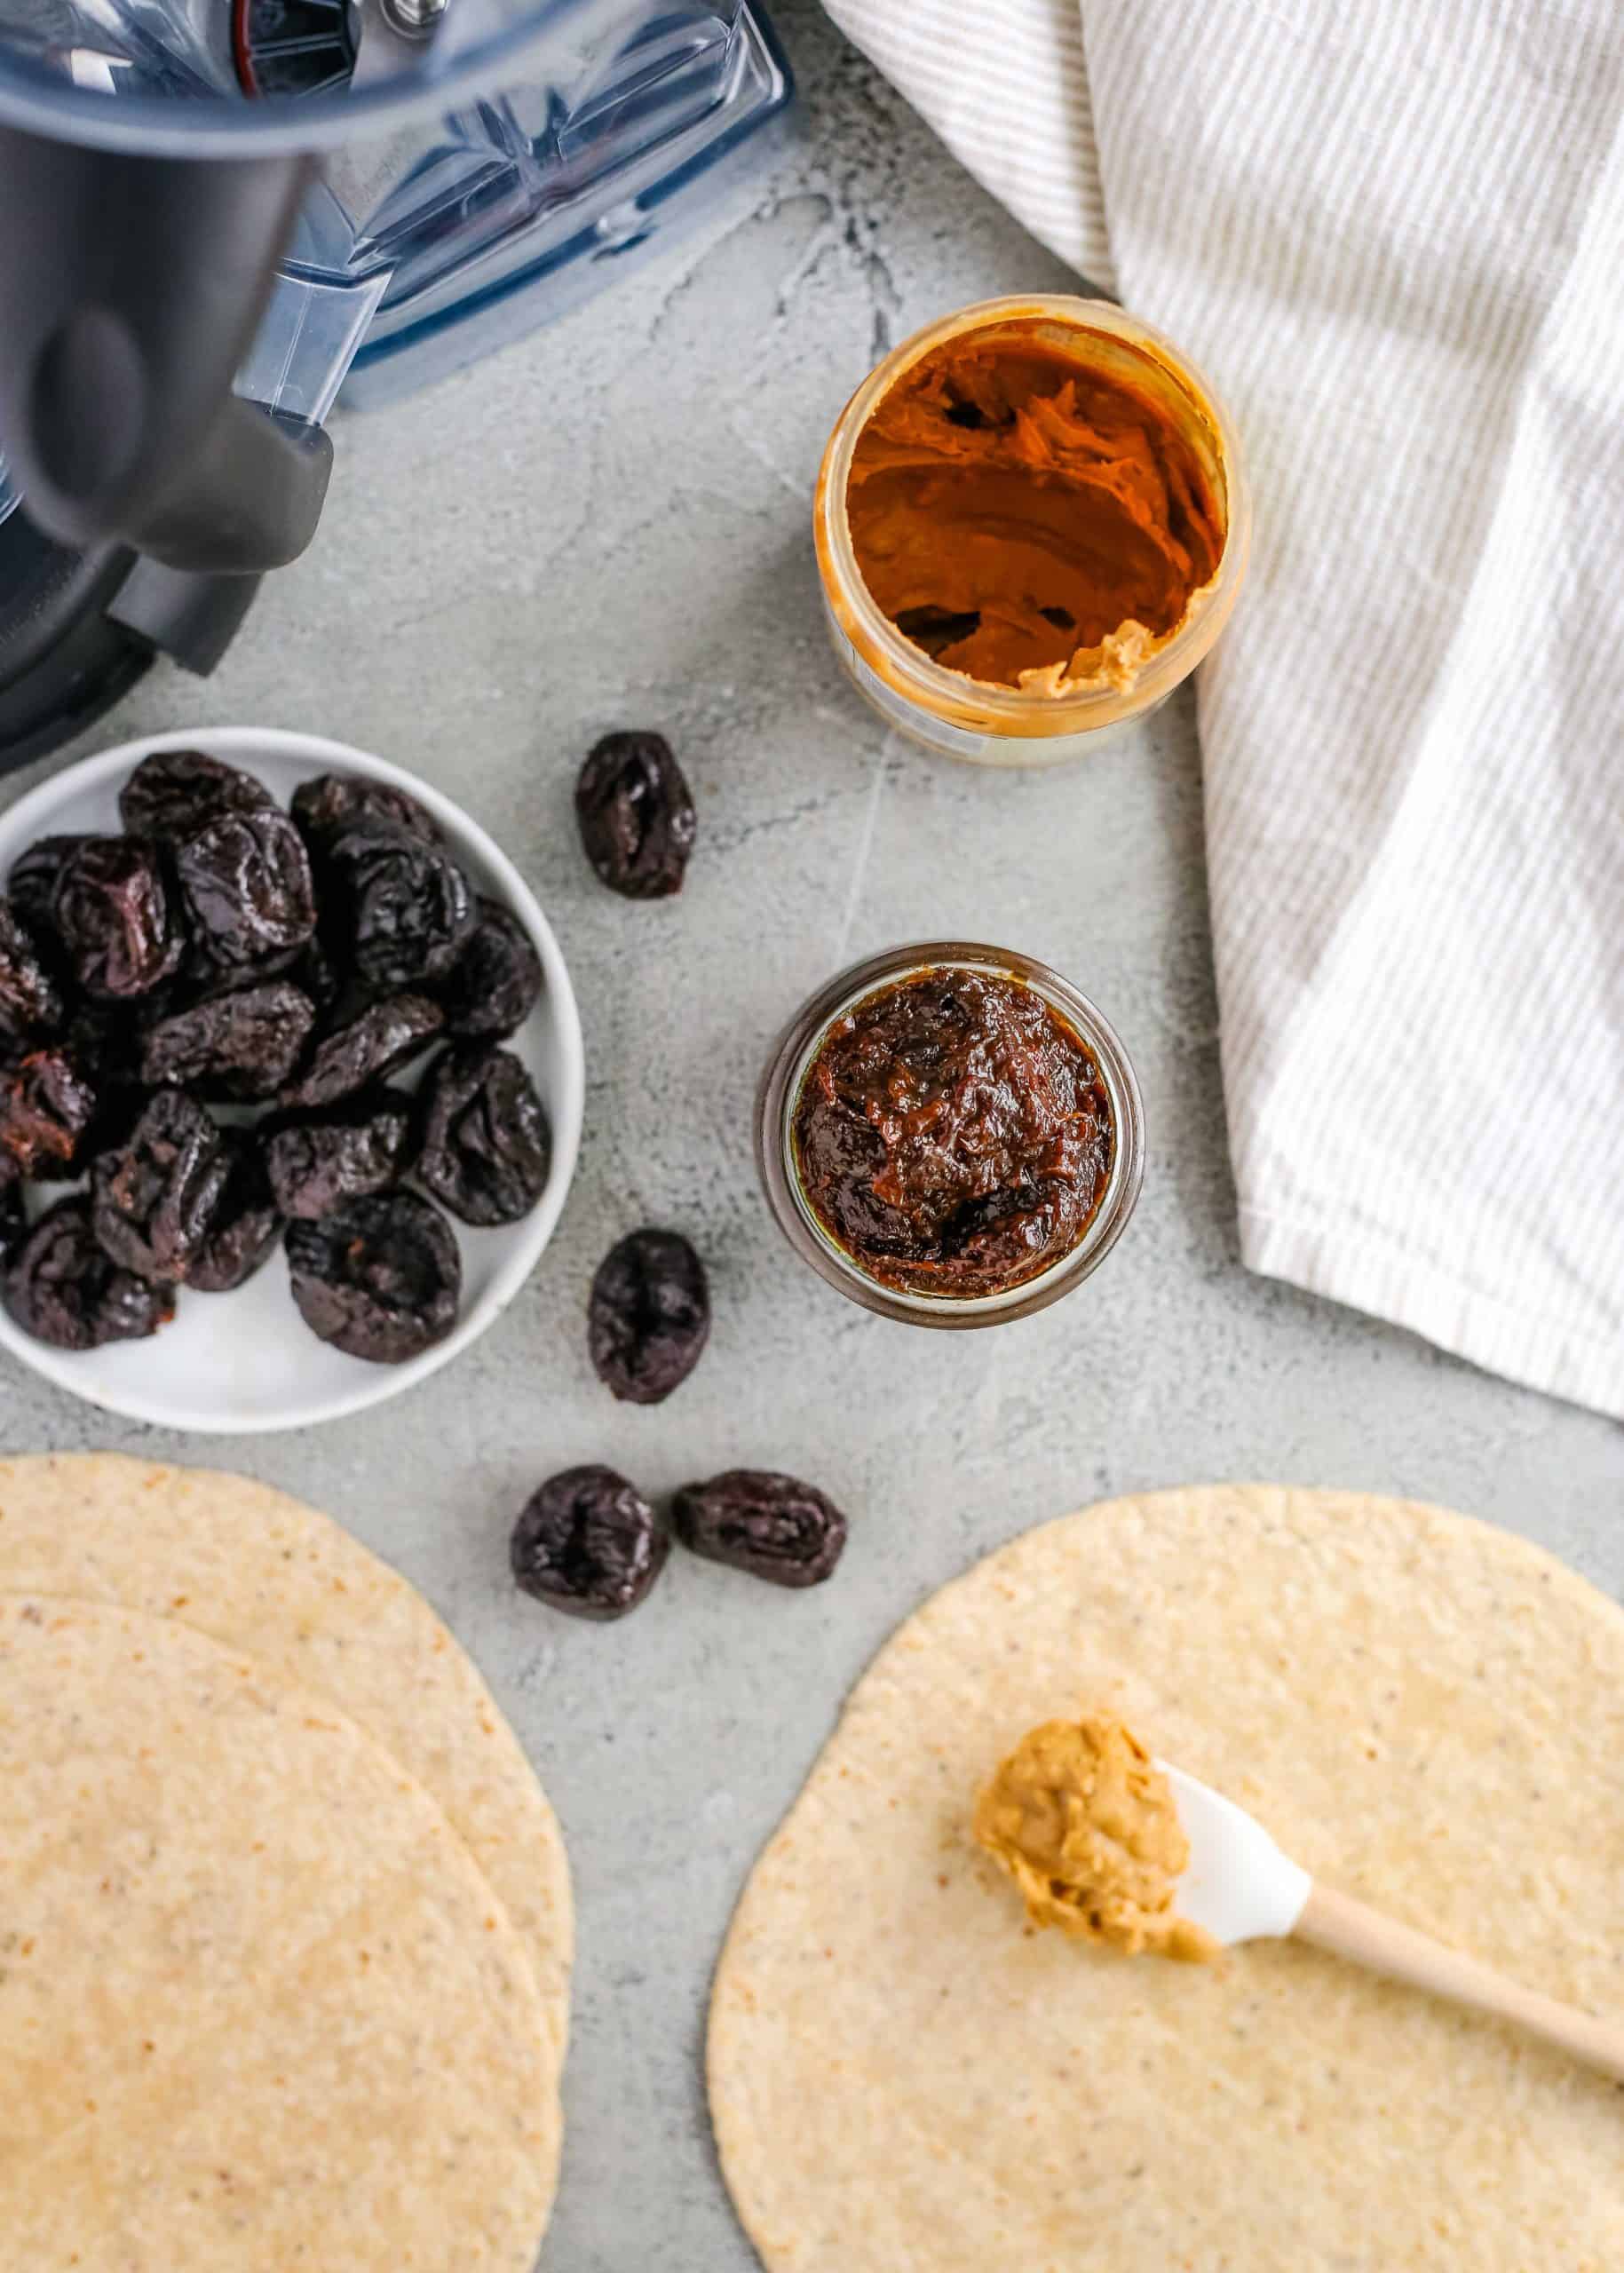 Overhead view of prunes with easy prune puree and peanut butter as an easy snack to enjoy the health benefits of prunes